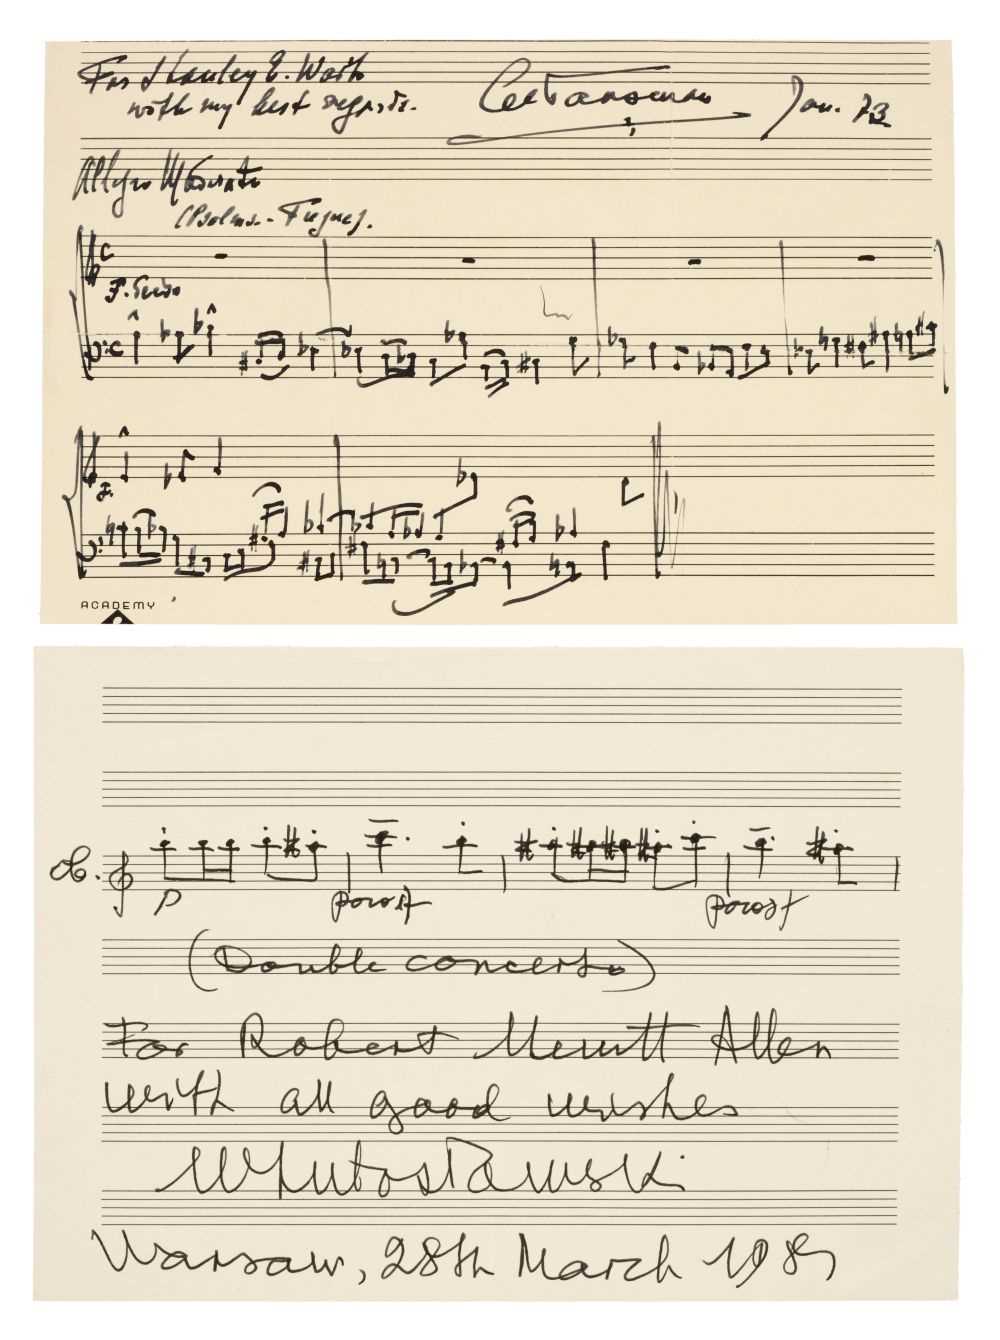 Lot 589 - Musical Autographs. A group of 13 autograph musical quotations, mostly 20th century